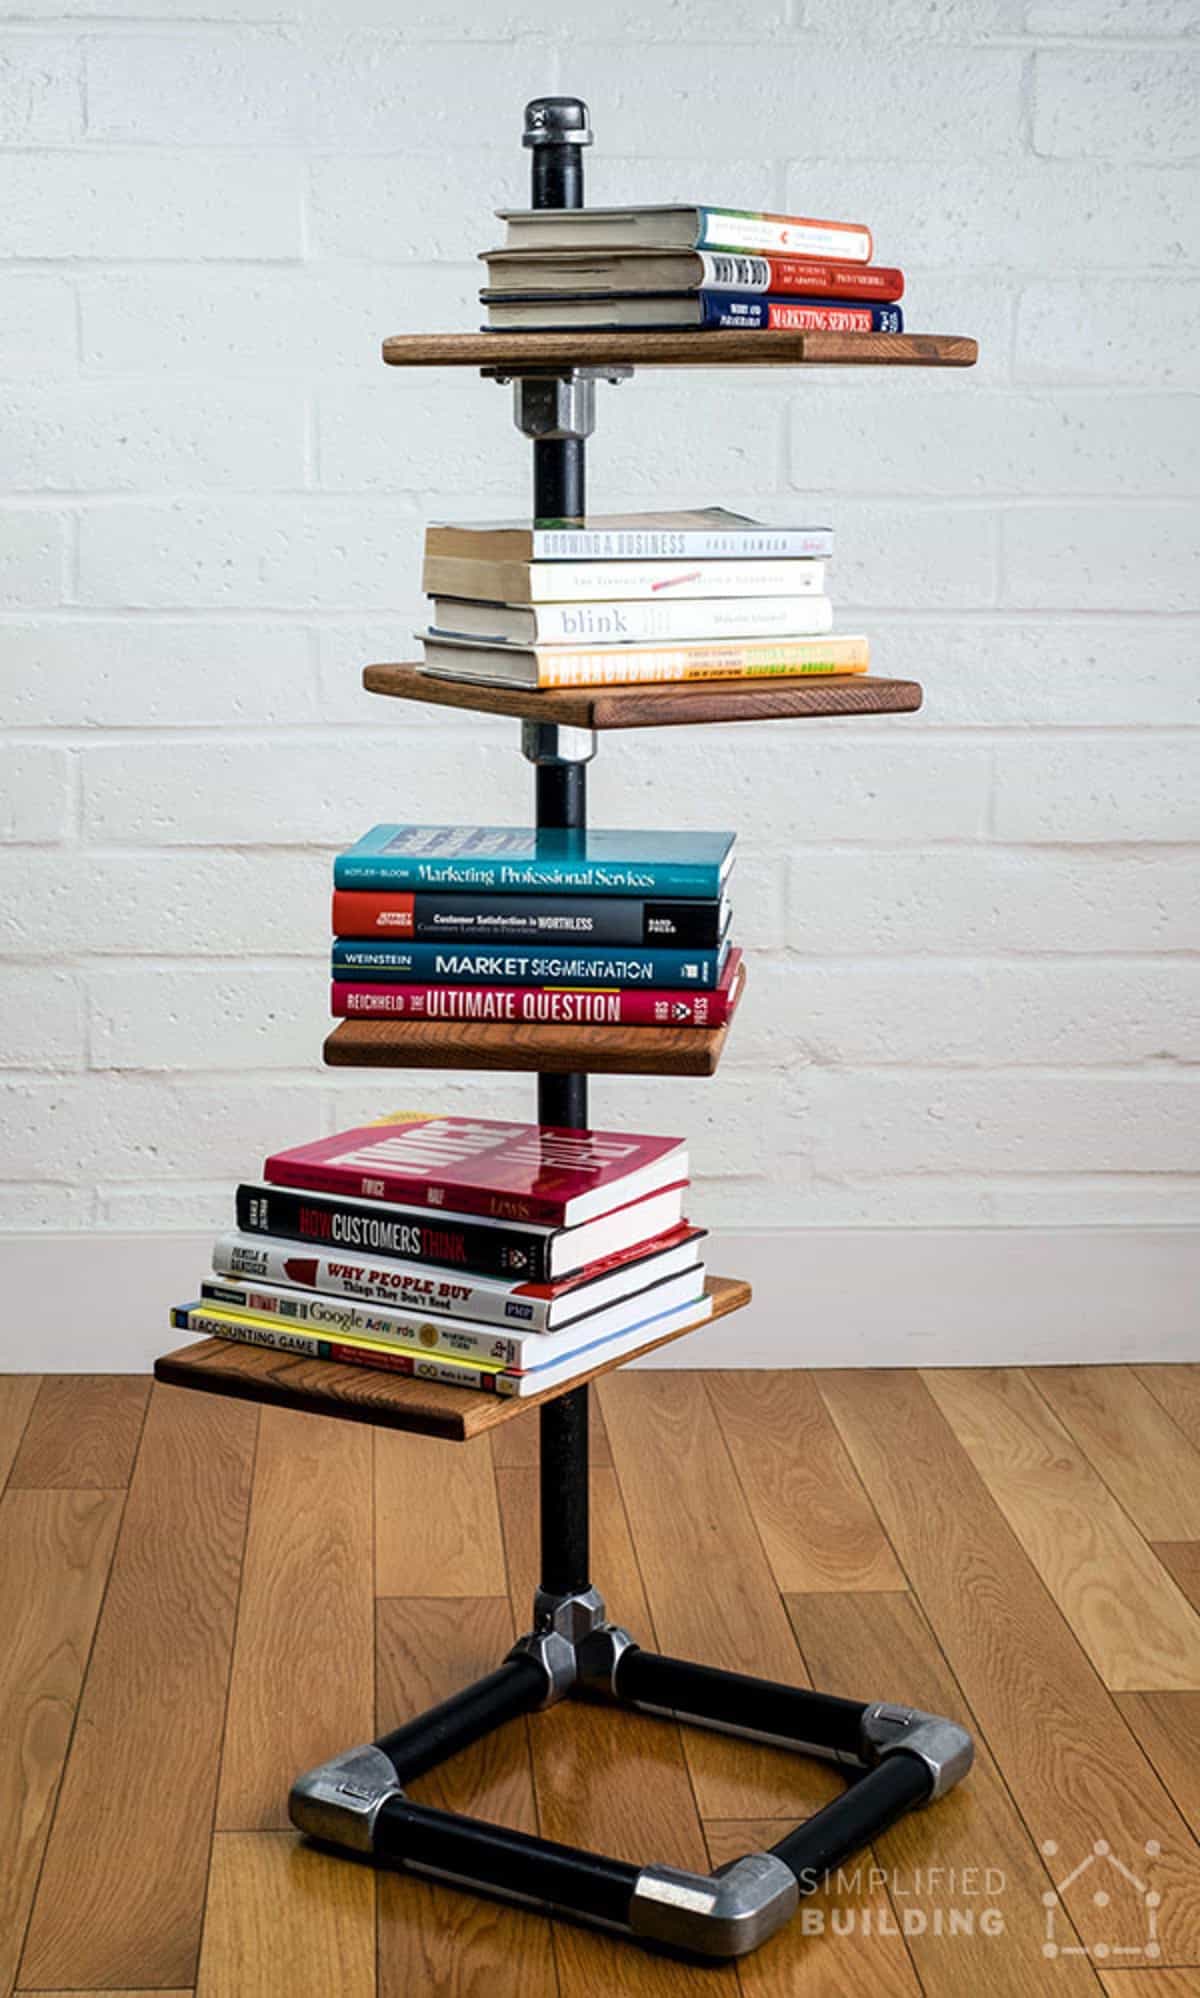 The Free-standing Book “Tree”